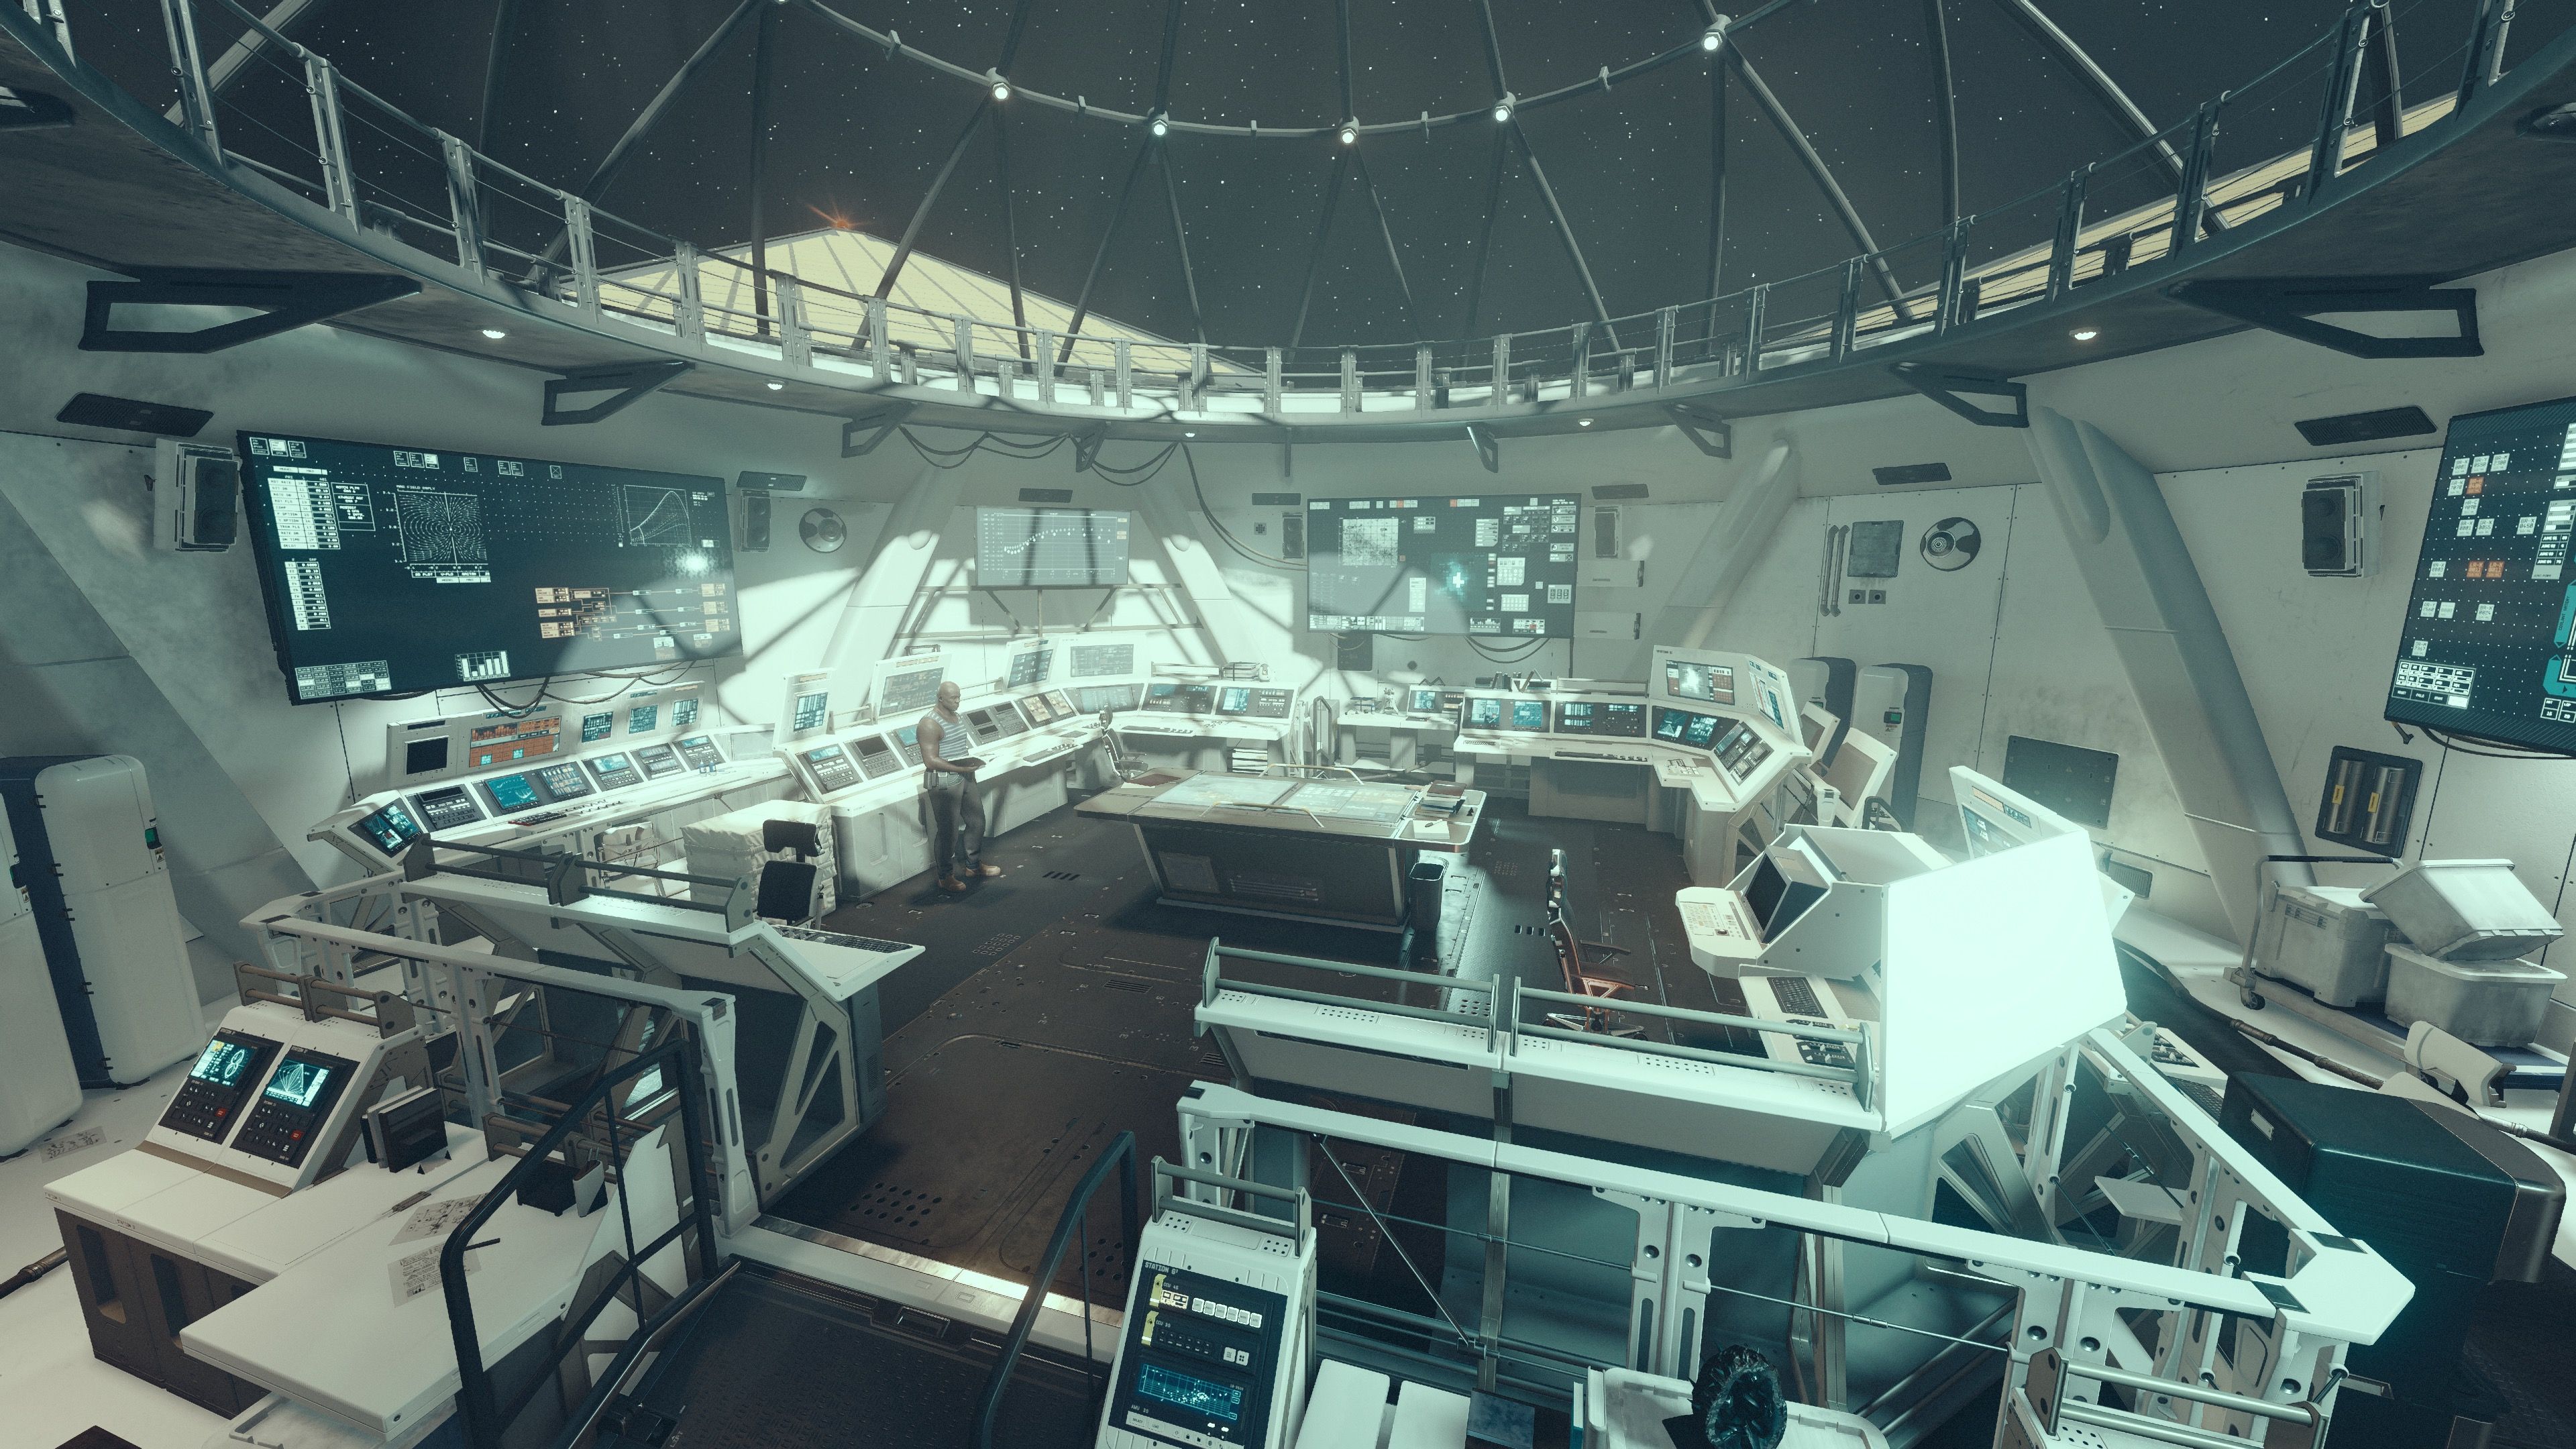 Another screenshot, this one is inside the main control room of the space station "The Eye" that's orbiting Jemison. The room is round and stark white, with rows of "NASA punk"-looking consoles with displays and buttons on them. The roof is clear glass looking out into space where you can see the stars.